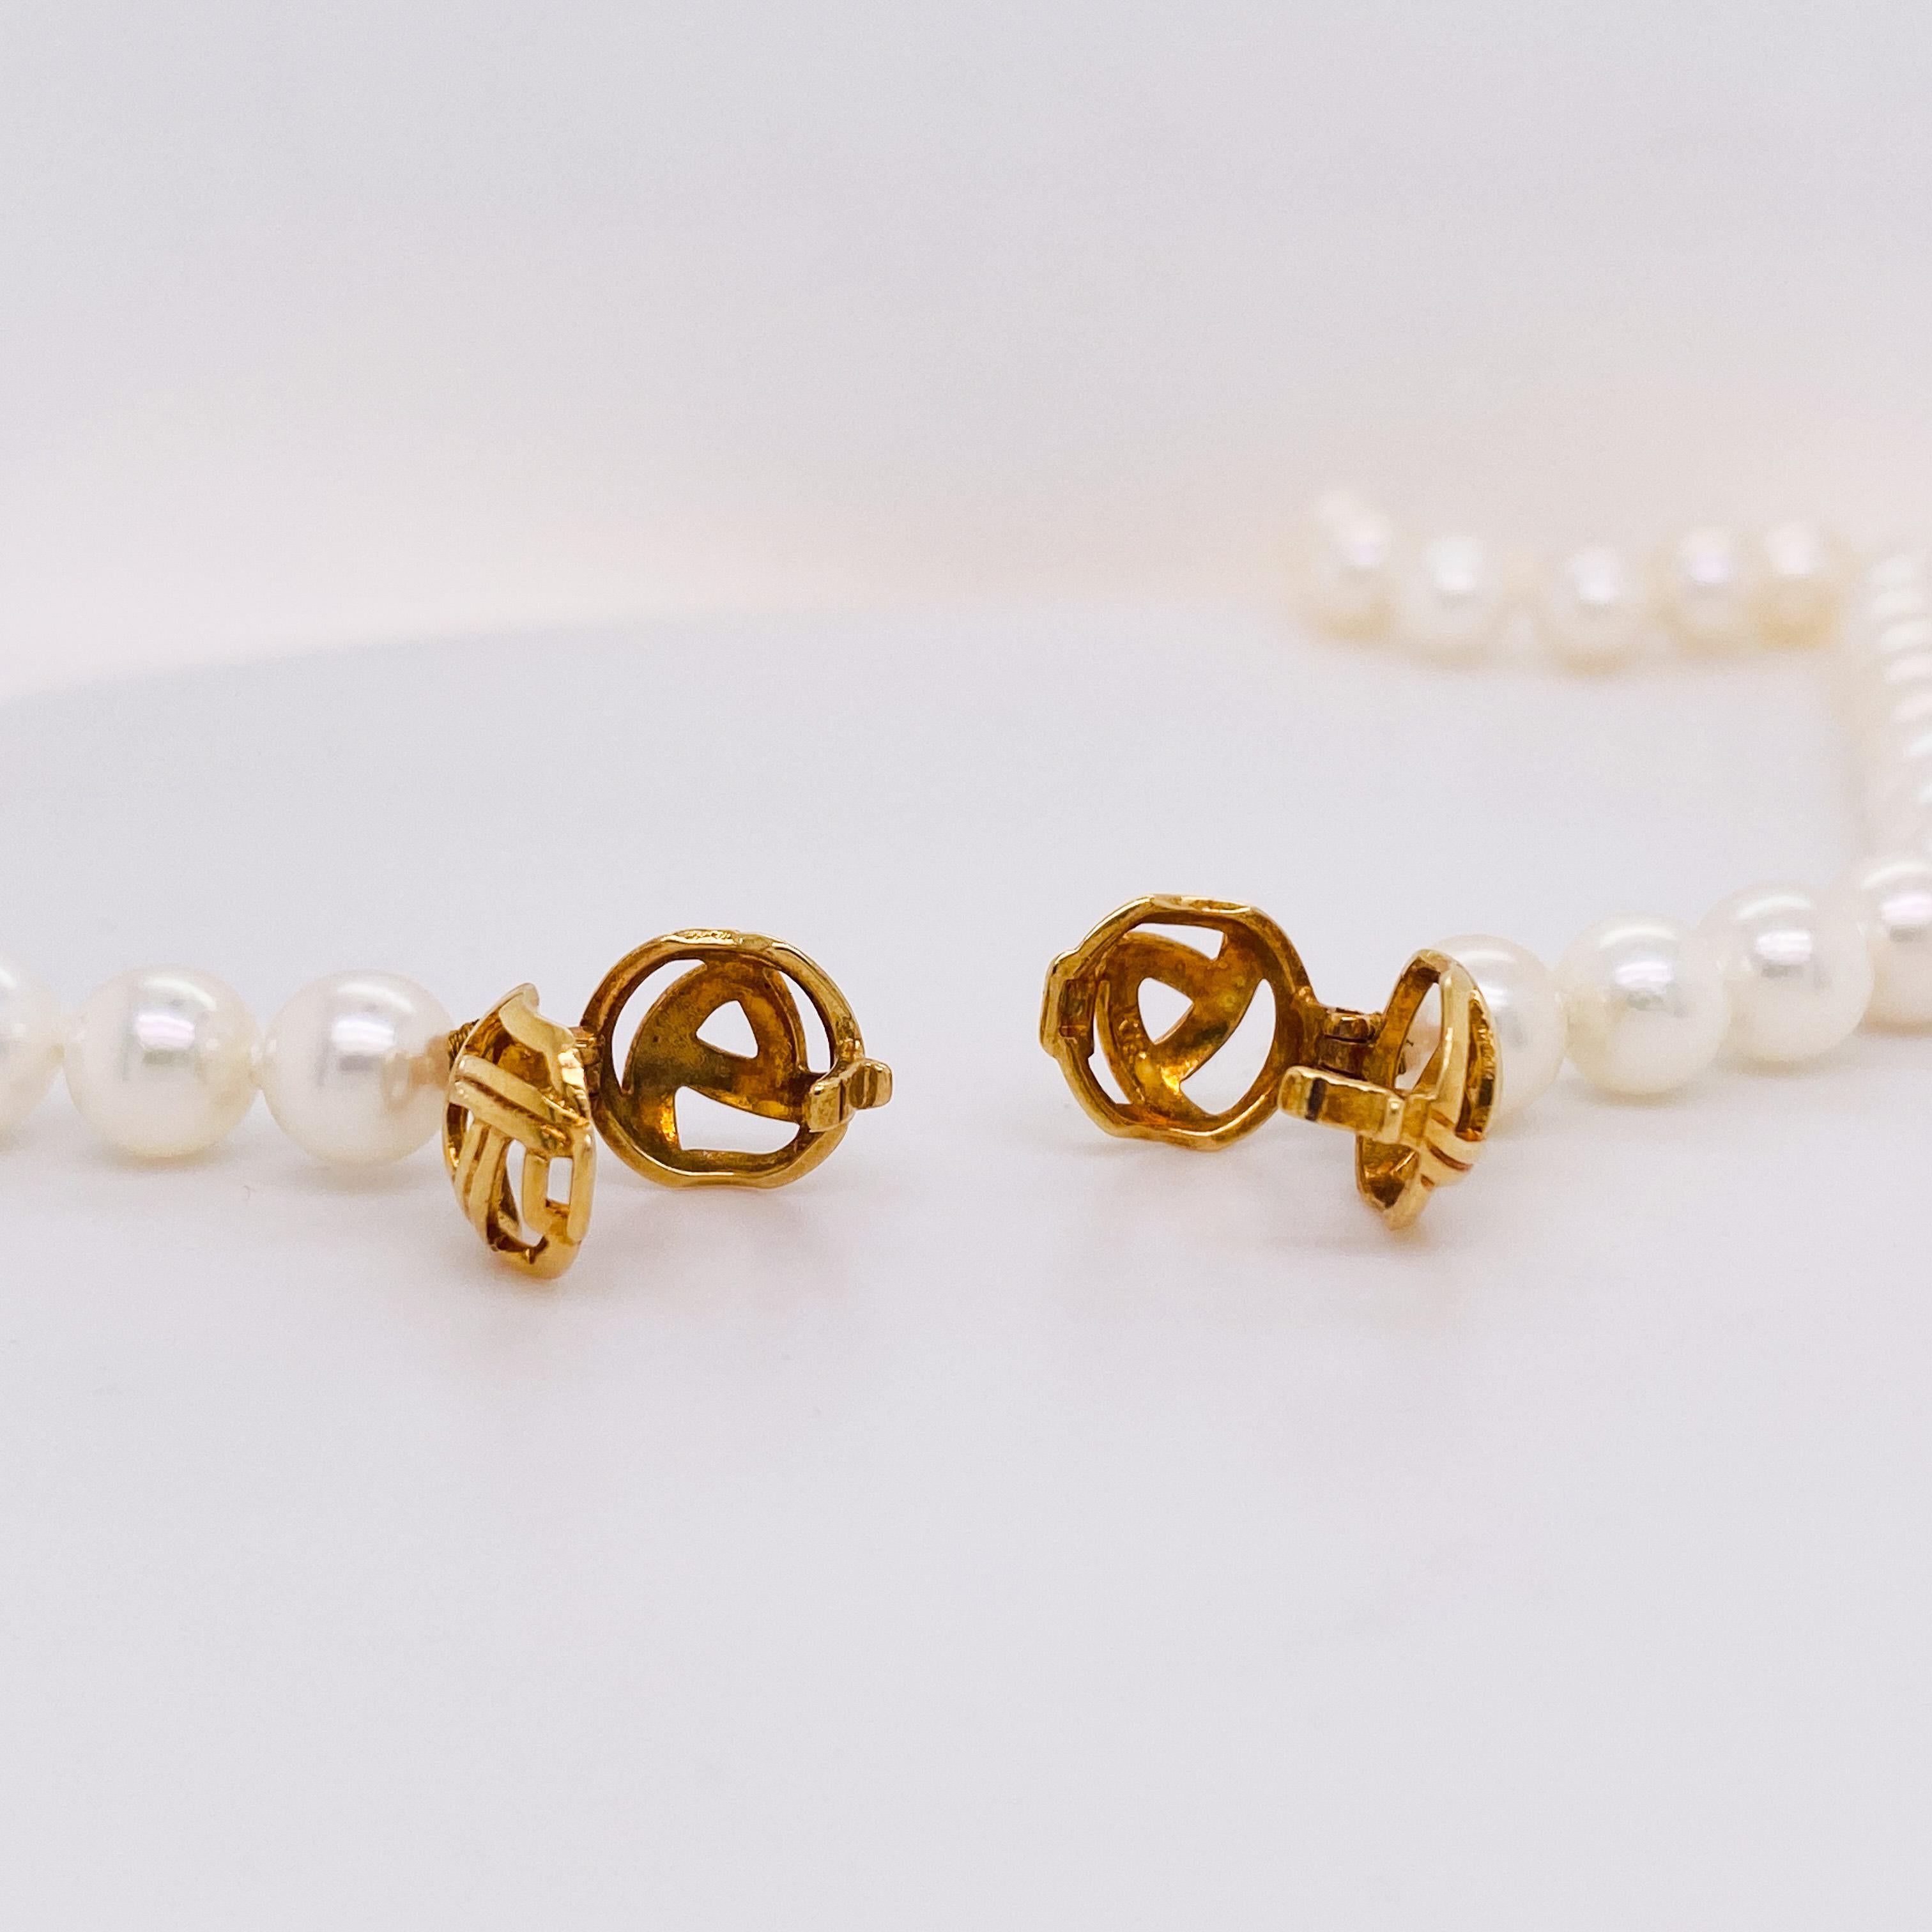 Add a fresh touch to your favorite pearl look with this strand! Your stylish friend will want to buy it off you! These beautifully matched genuine Japanese (Akoya) pearls were hand-strung with silk and feature a unique and versatile pearl clasp!